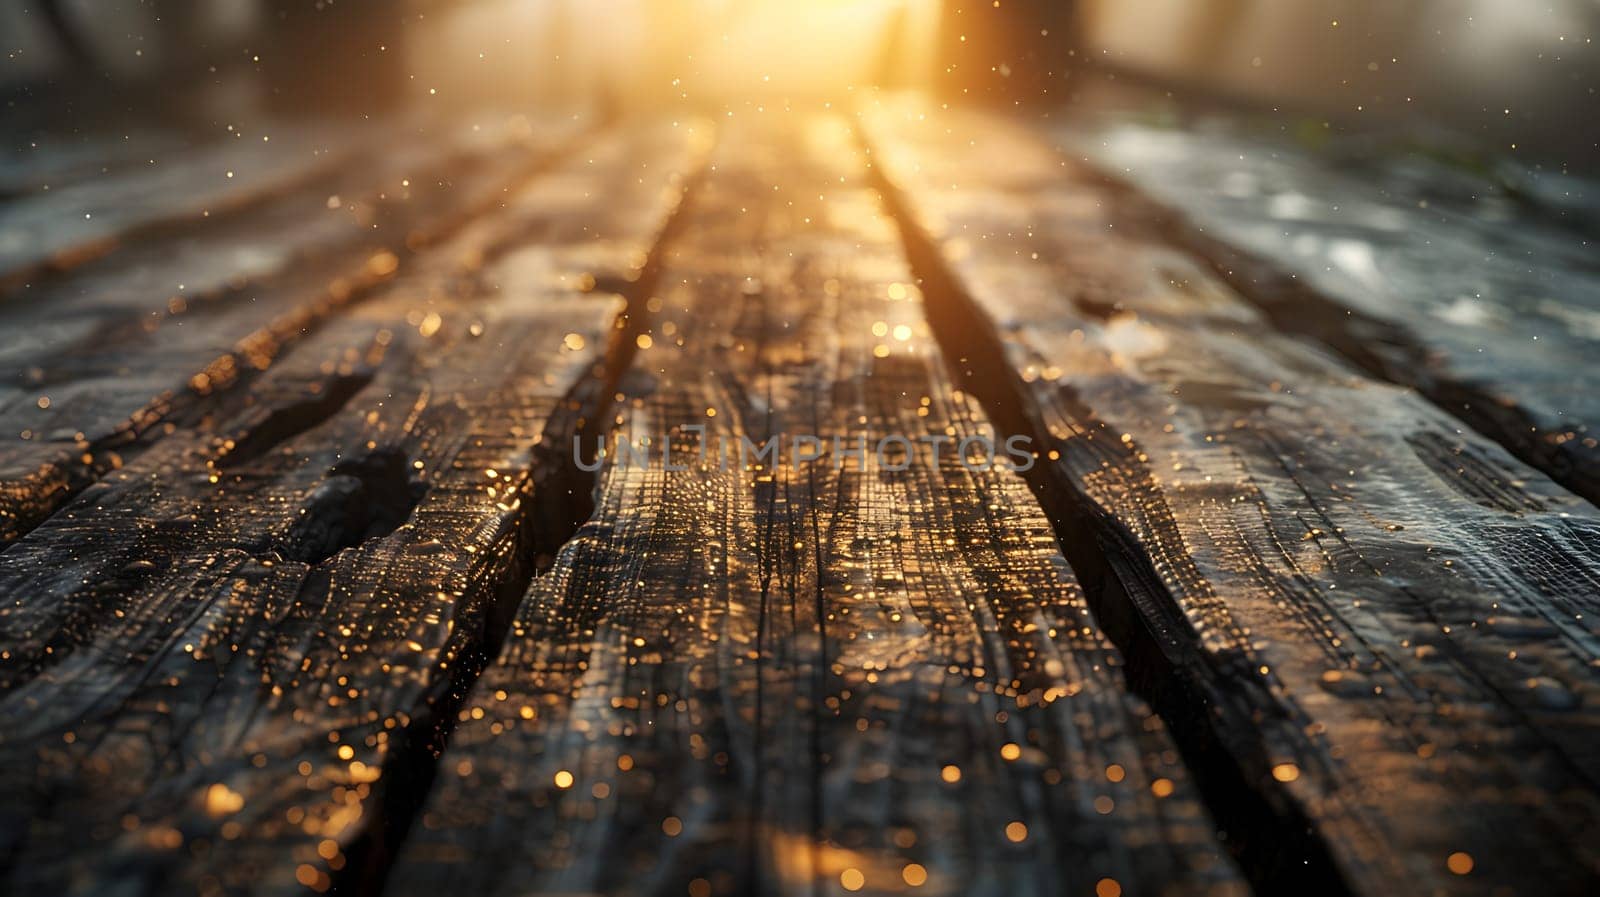 Closeup of wooden table with sunlight shining through by Nadtochiy